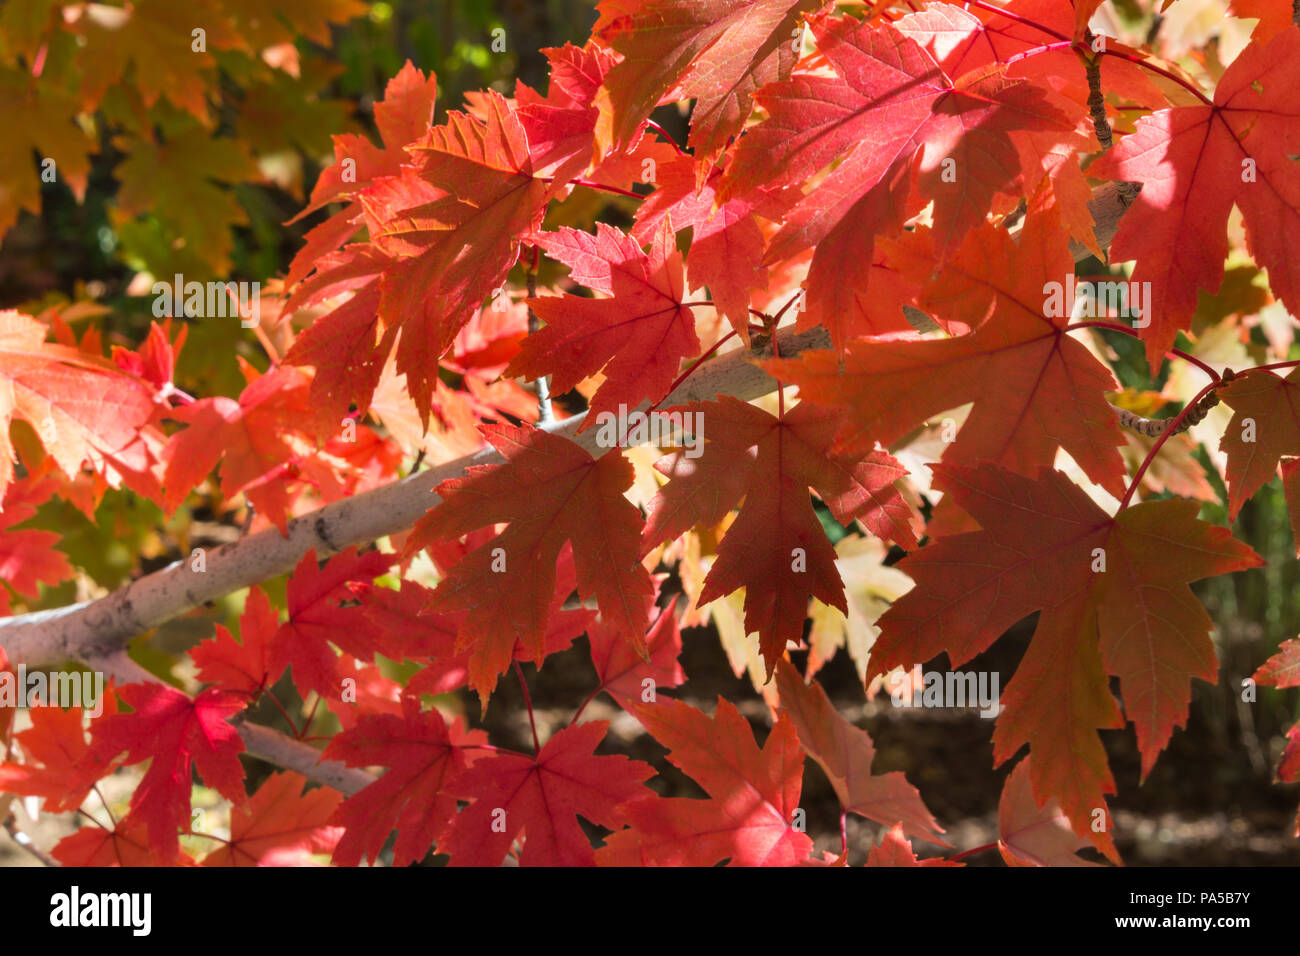 Beautiful red maple leaves with fall colors on display. Simply gorgeous! Stock Photo